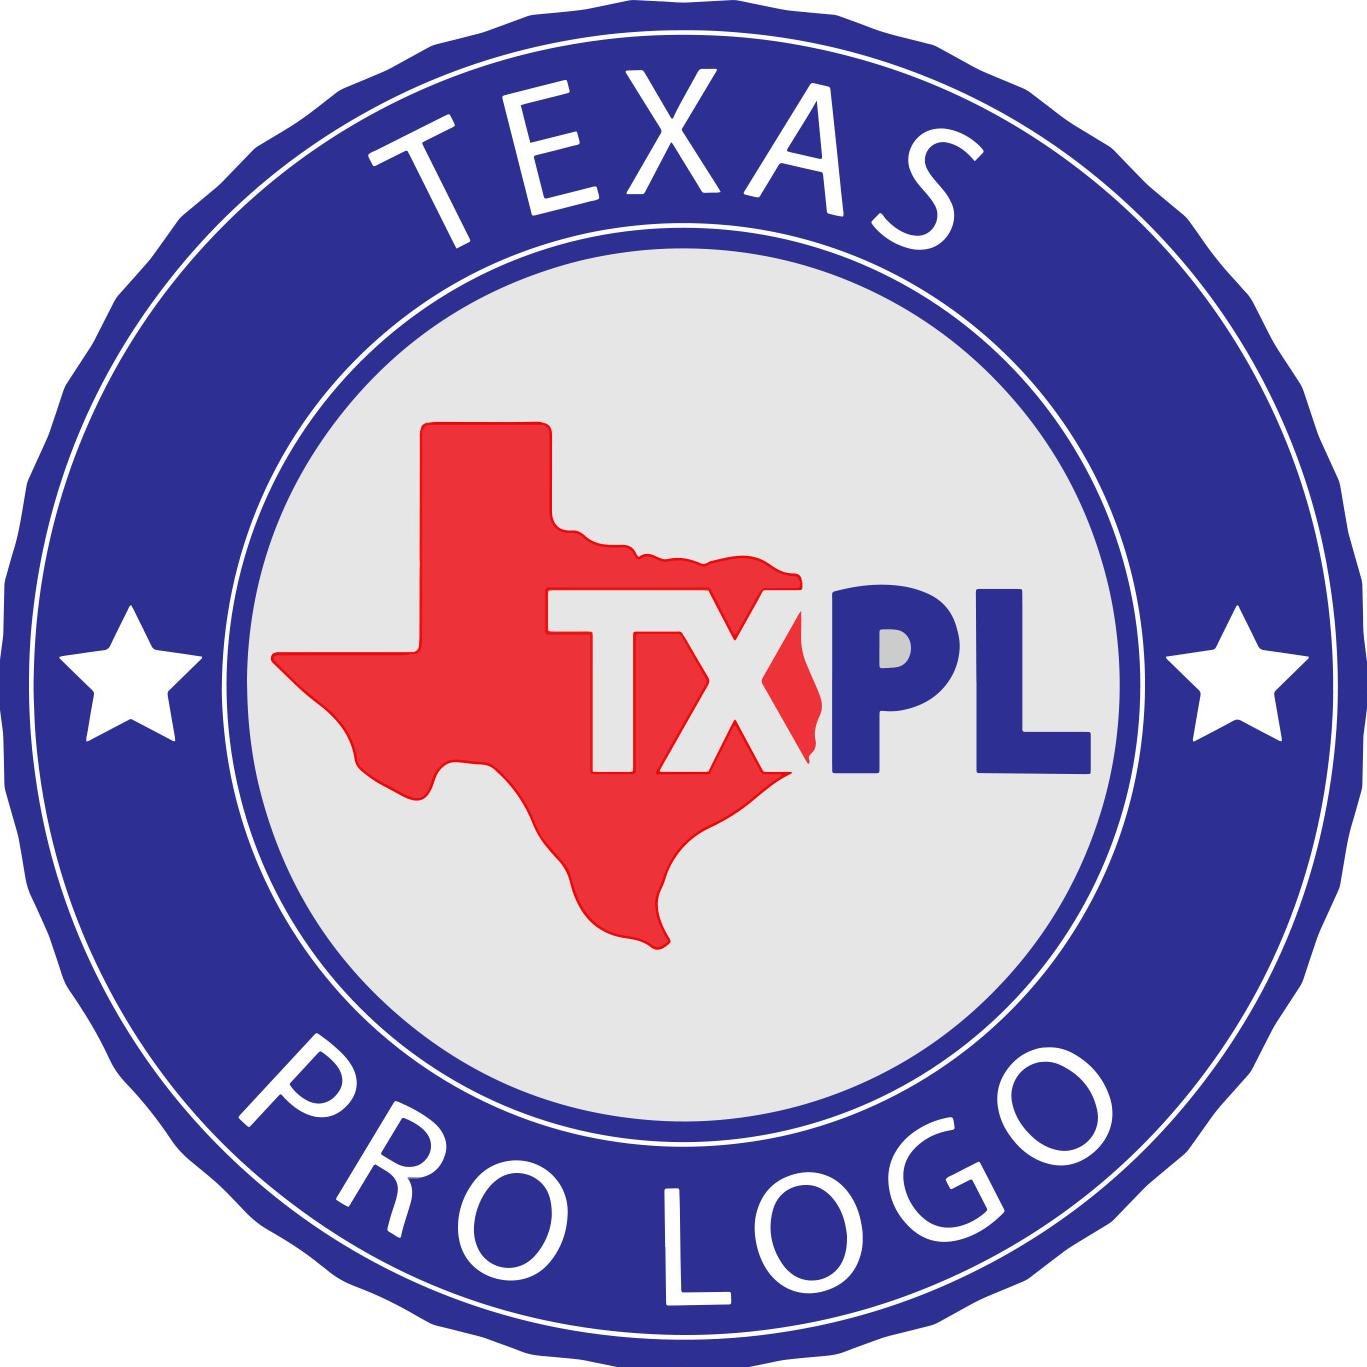 Texas Pro Logo offers a variety of custom print options. We are a local family owned business that believes in high quality and value.